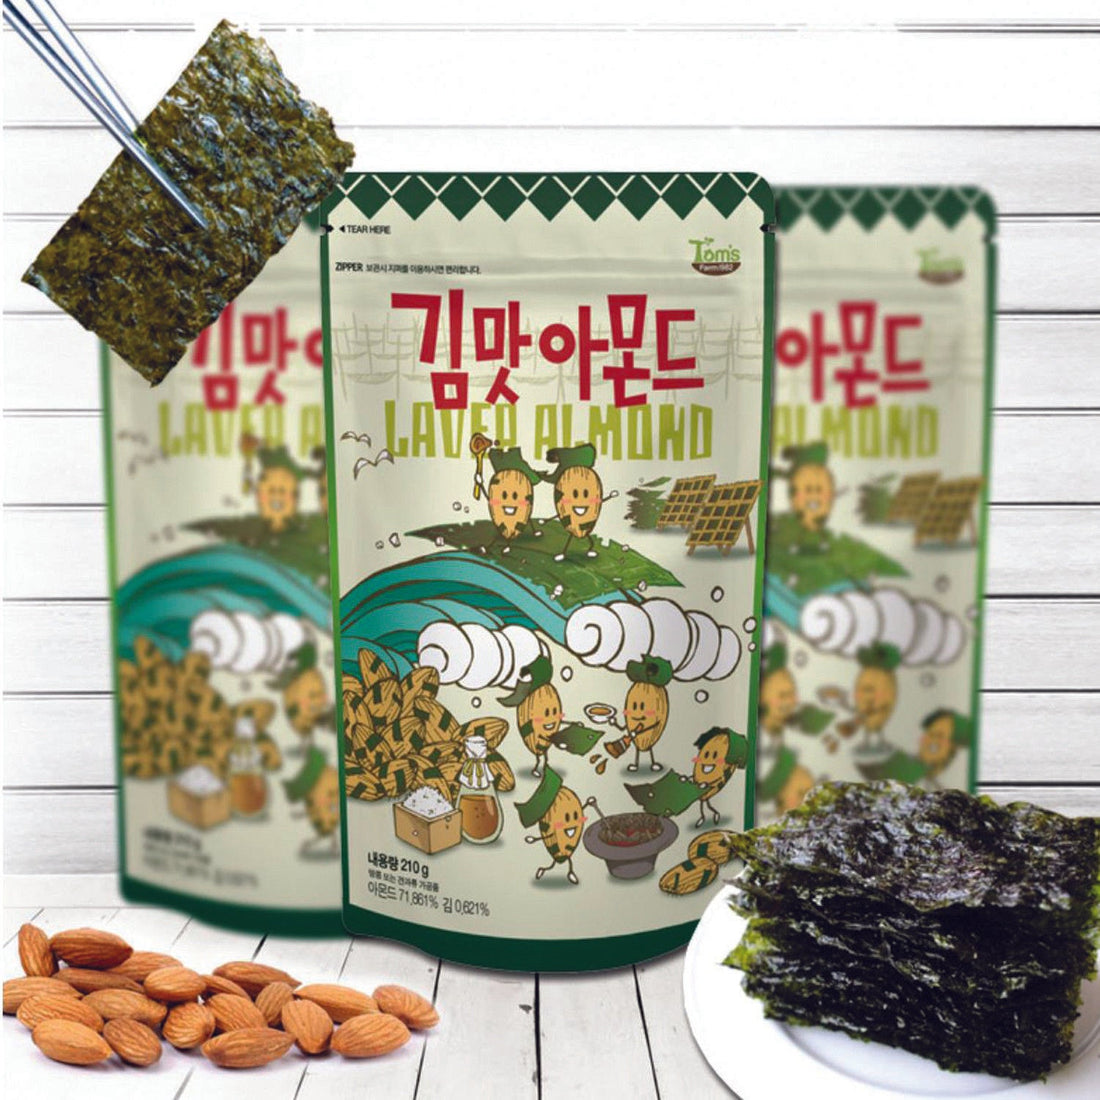 A Brand-new Korean Almond Is Just Out!